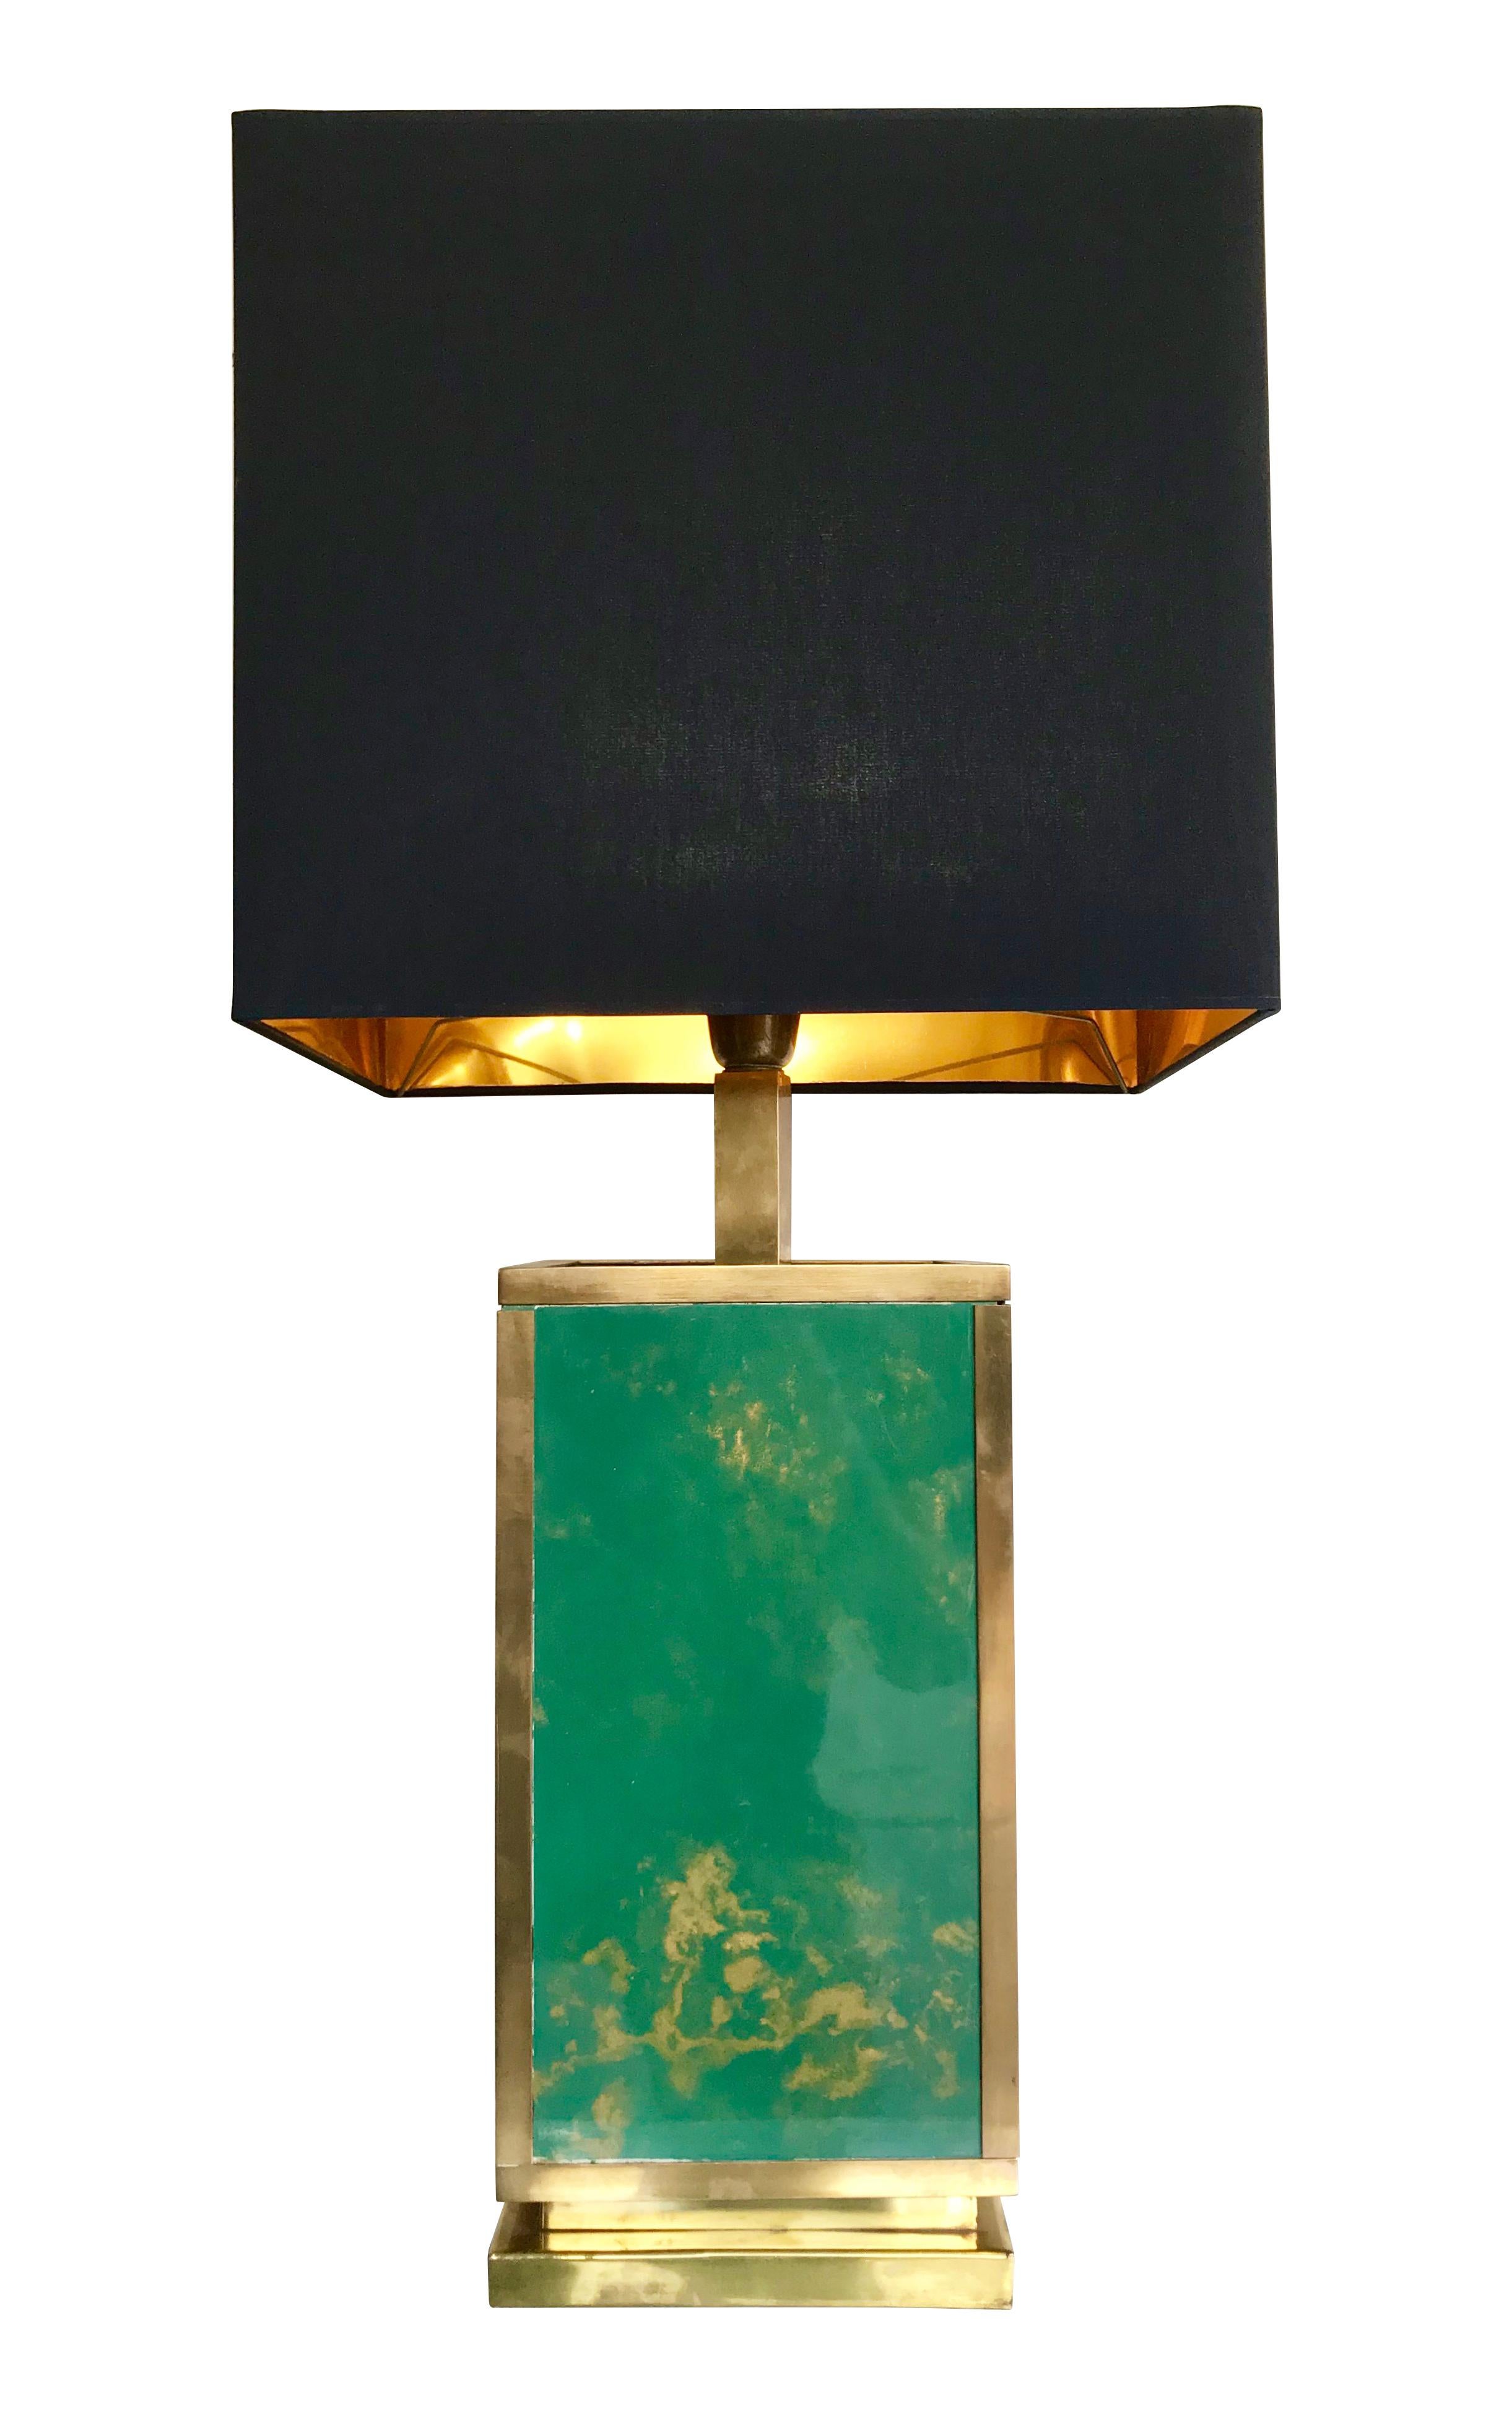 An large 1970s Italian brass lamp with green glass sides with gold swirling detail on the glass. With new black silk shade with gold lining. Re wired with antique gold flex and PAT tested.